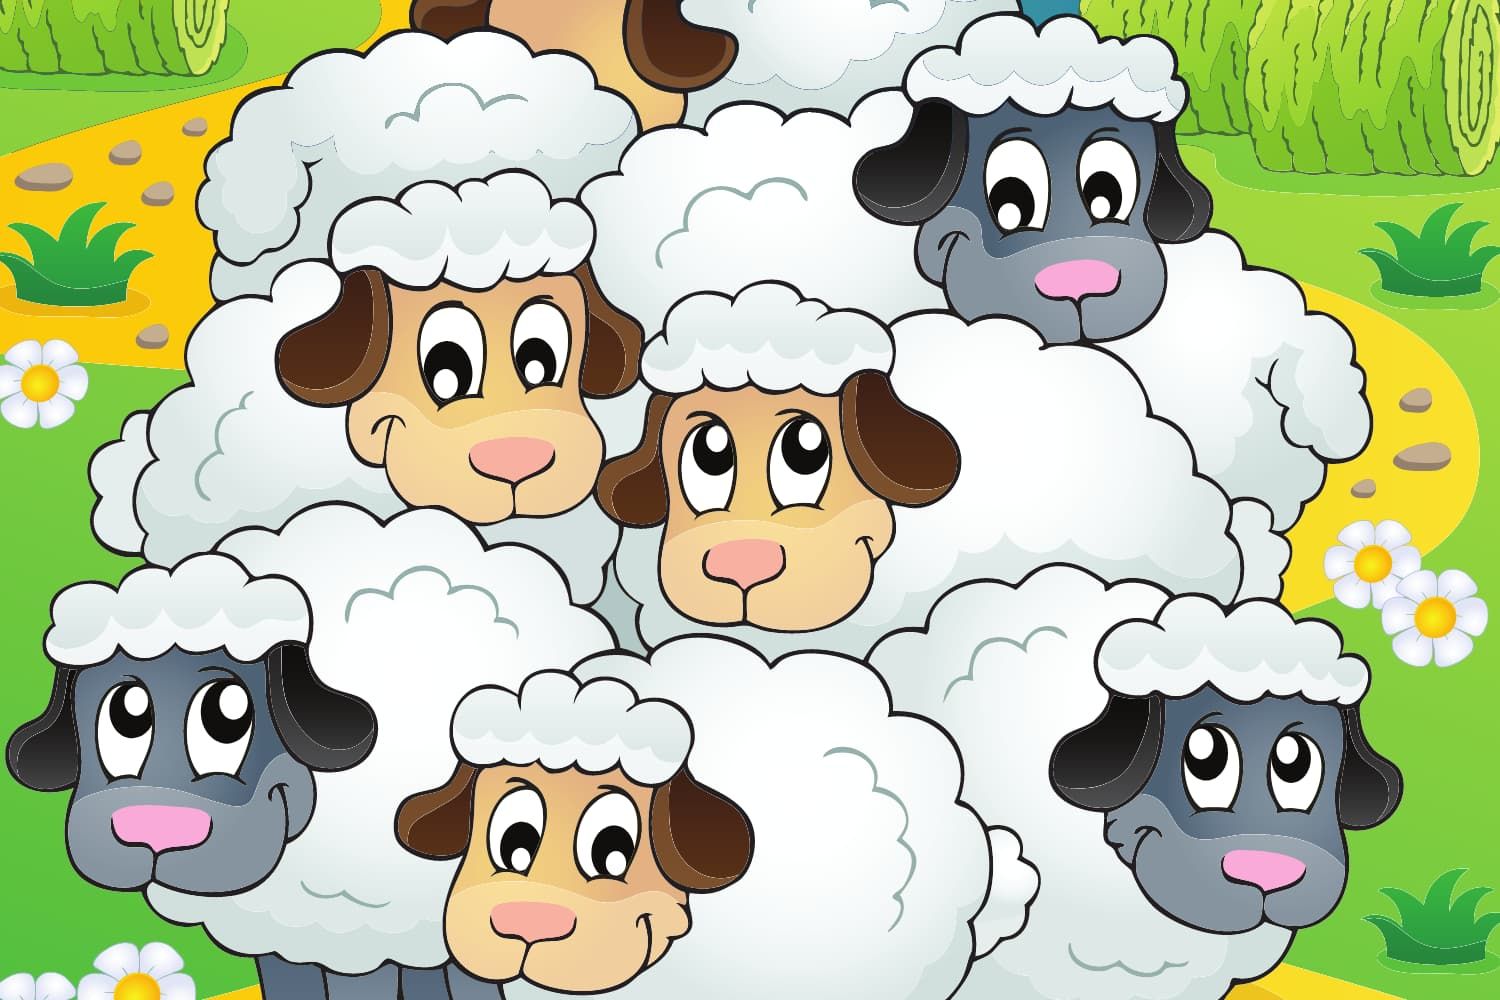 Game%20-%20NT%20Parable%20of%20the%20lost%20sheep%20-%20Count%20the%20sheep-b72376df Compassion 